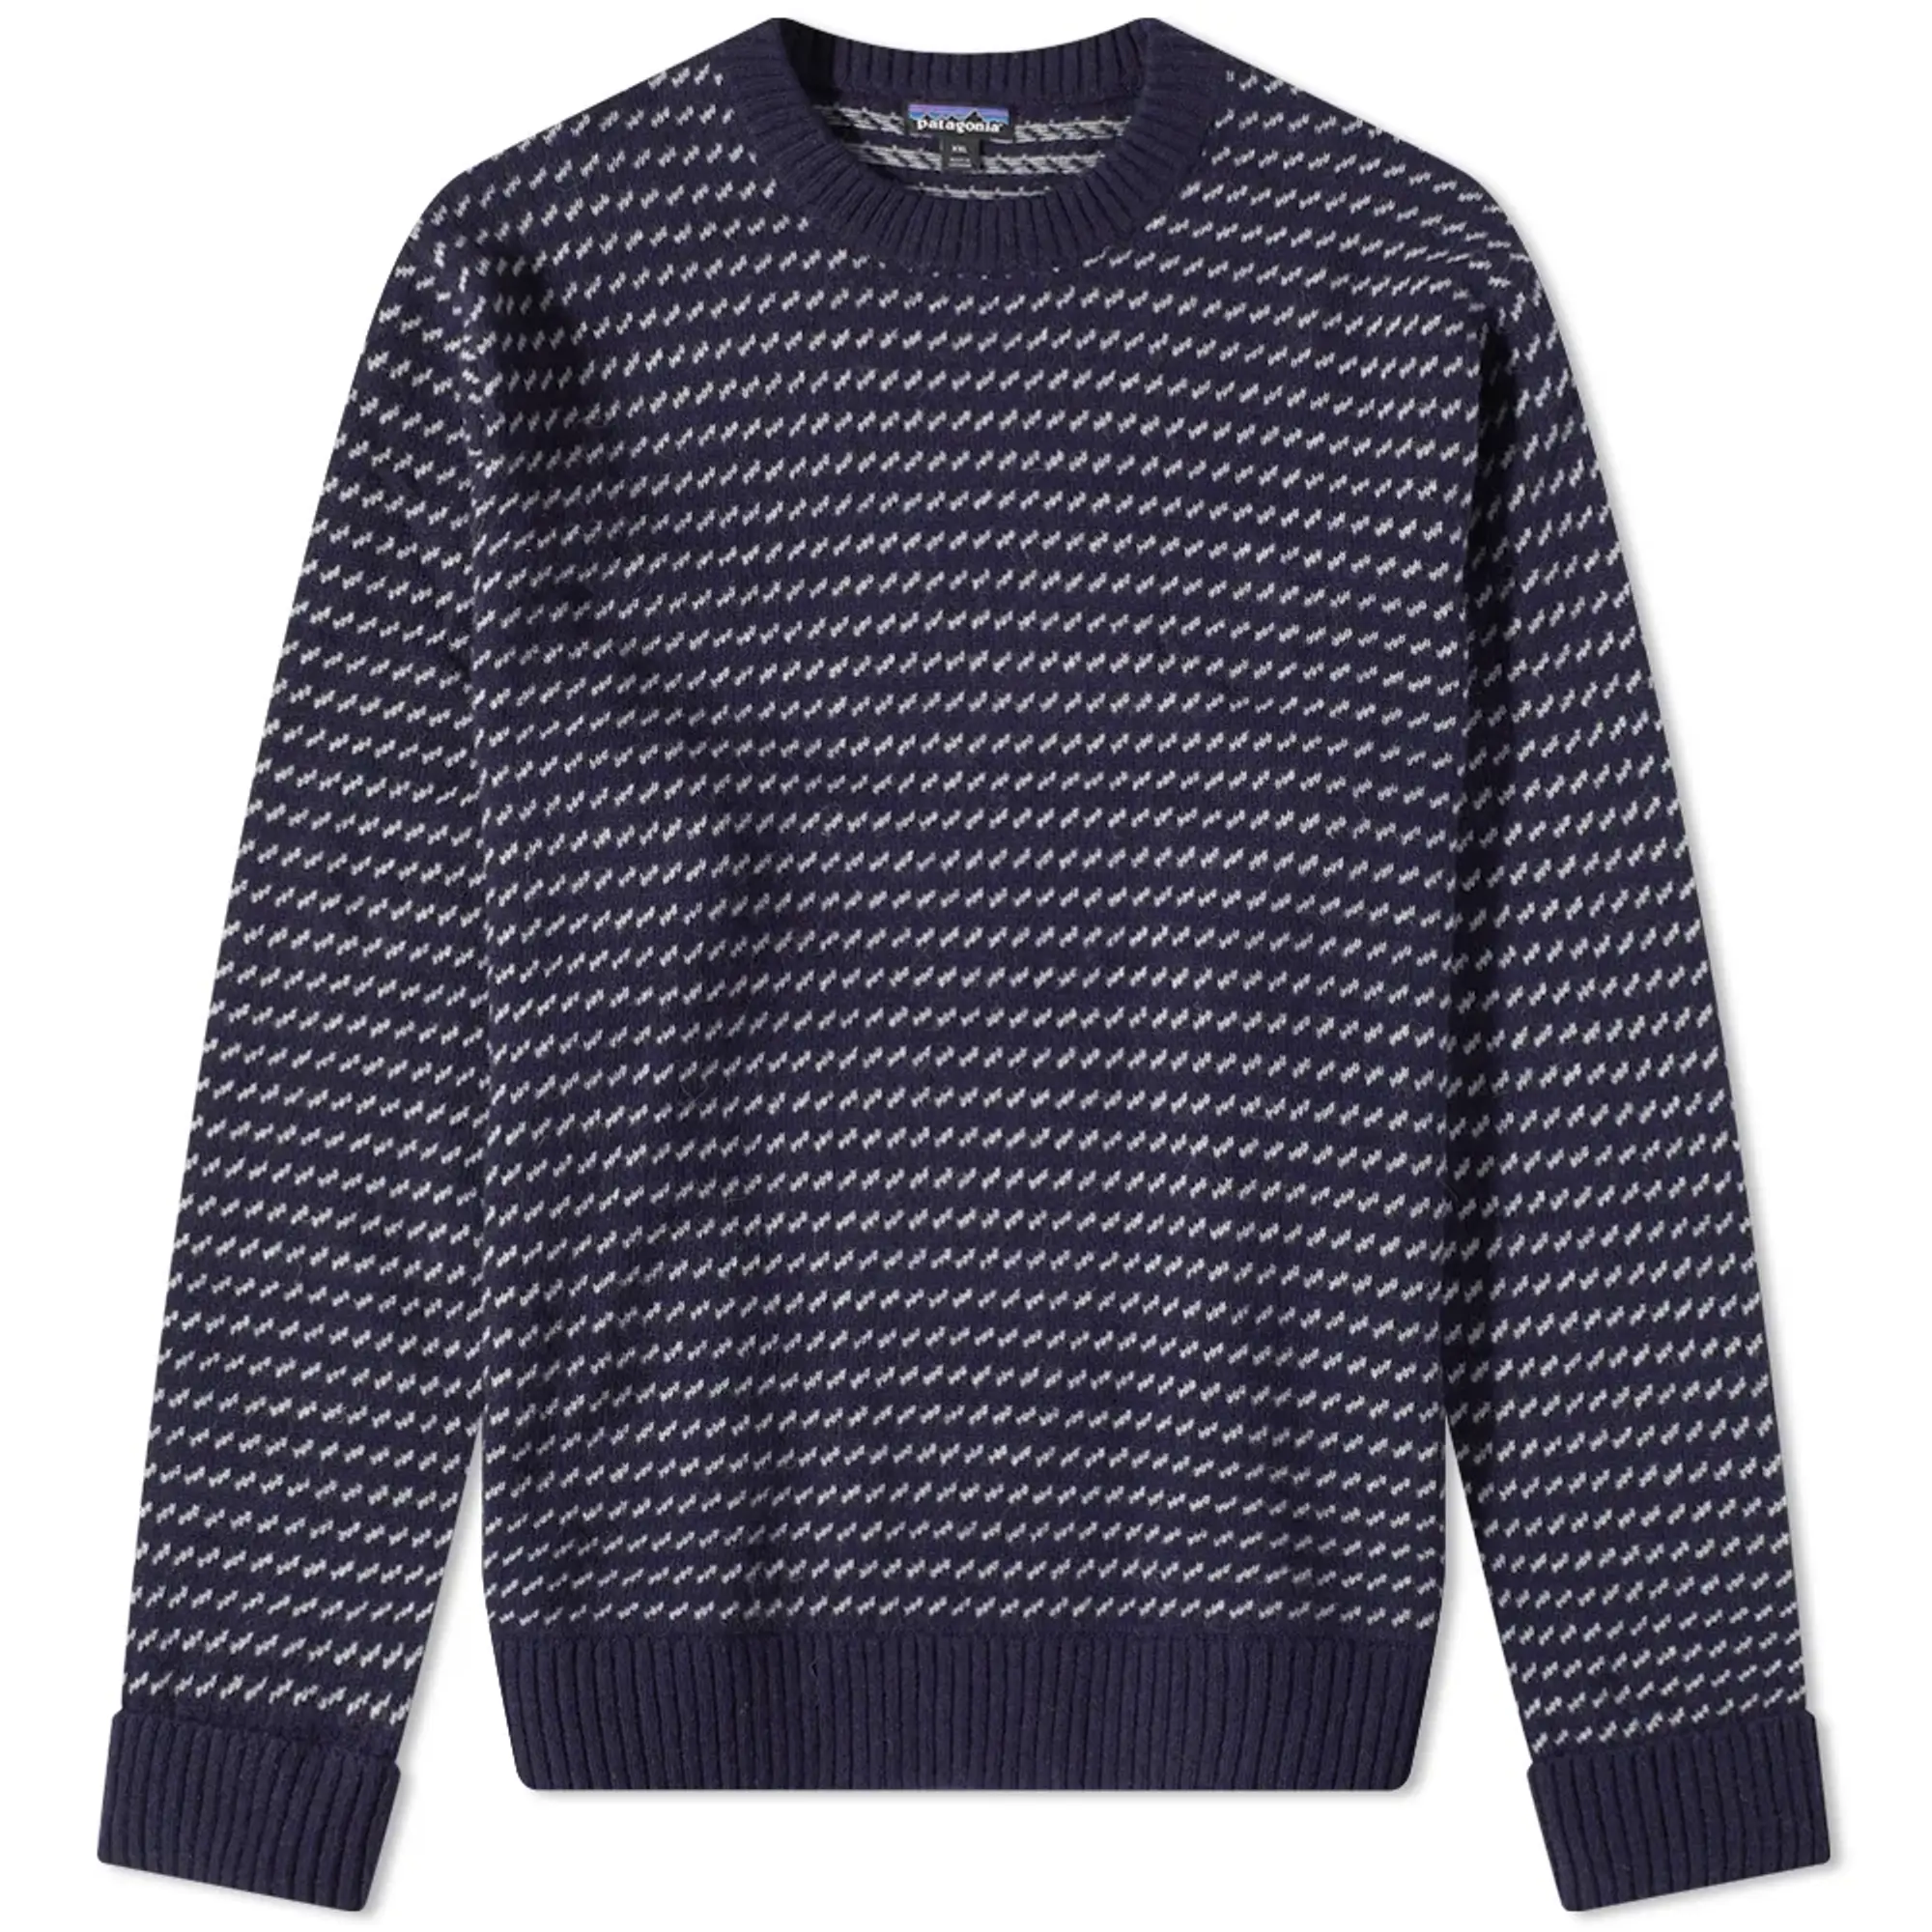 Patagonia Recycled Wool Sweater - Classic Navy